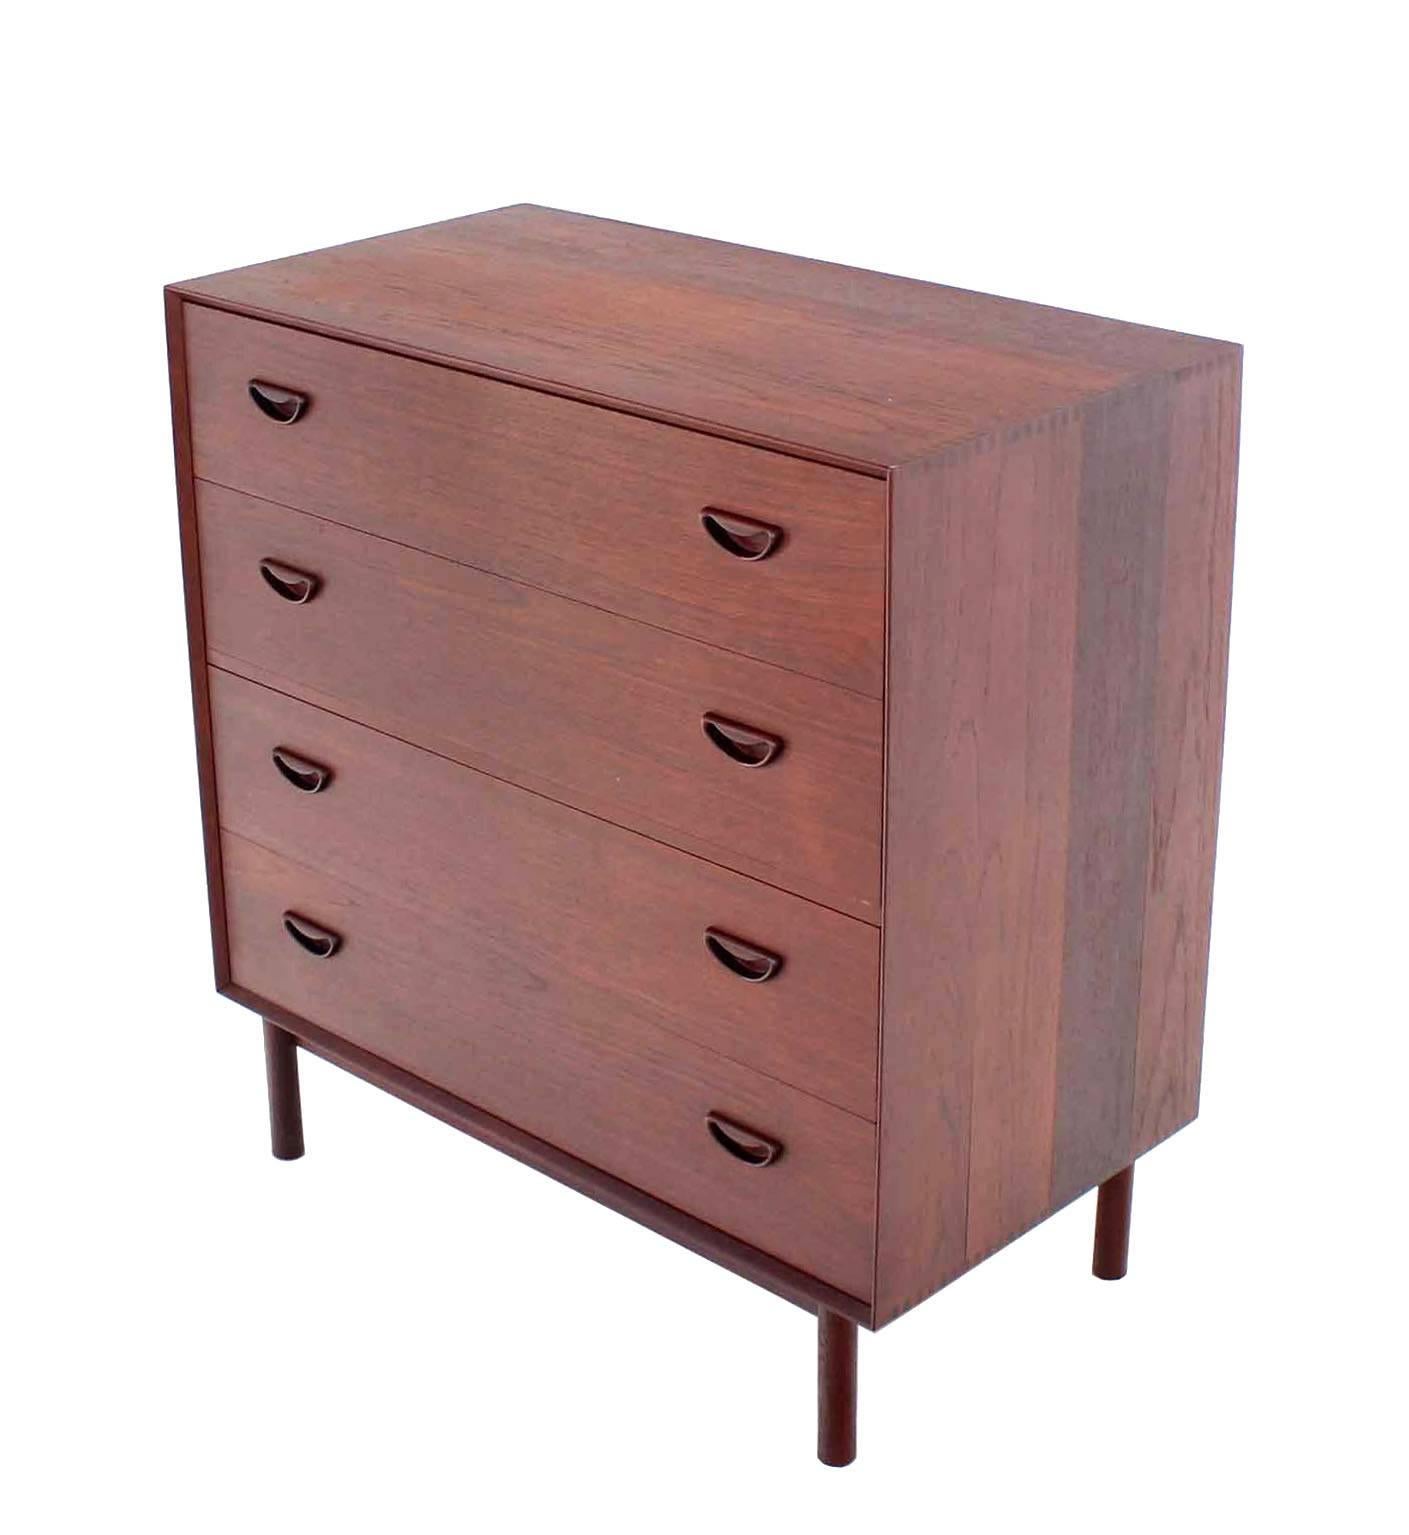 Mid-Century Modern solid teak chest with drop front vanity can be use as a small drop front desk too.